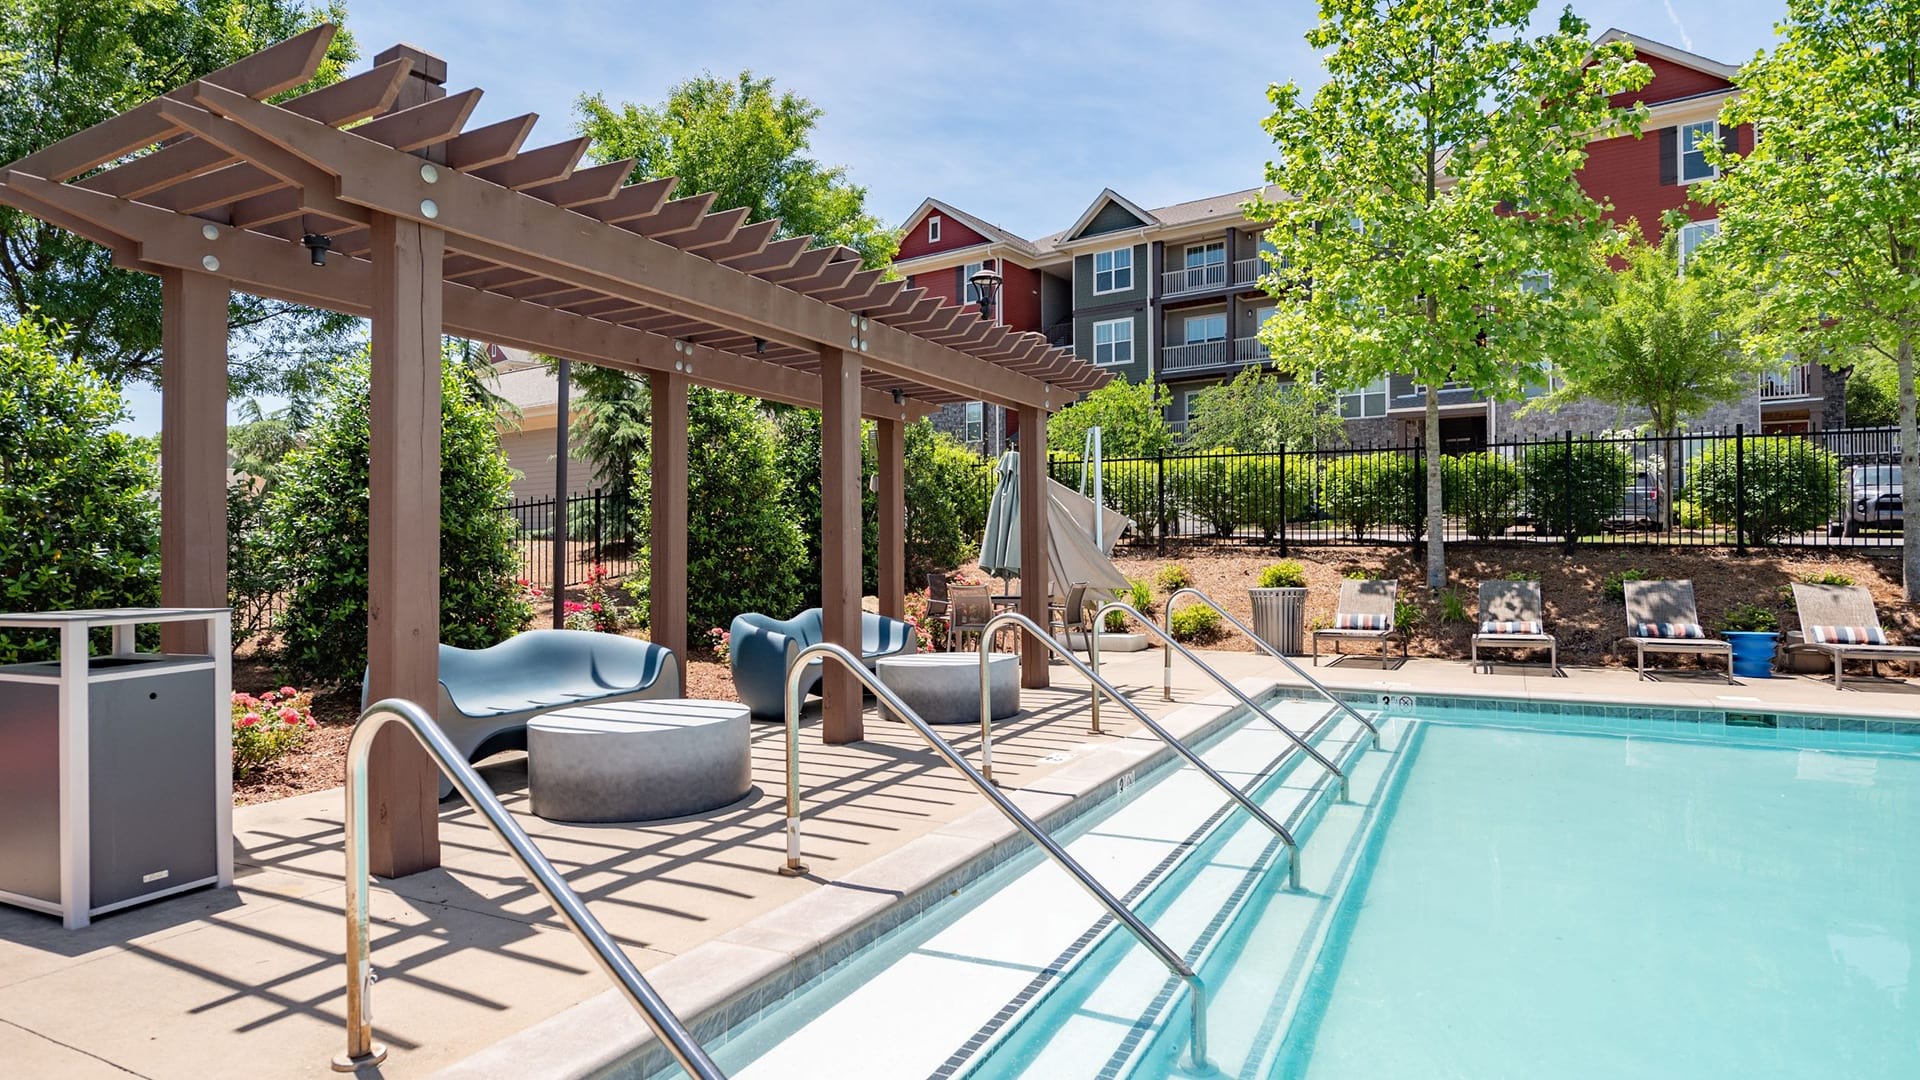 Saltwater Pool and Lounge Chairs at Our Apartments in Nashville, Tennessee